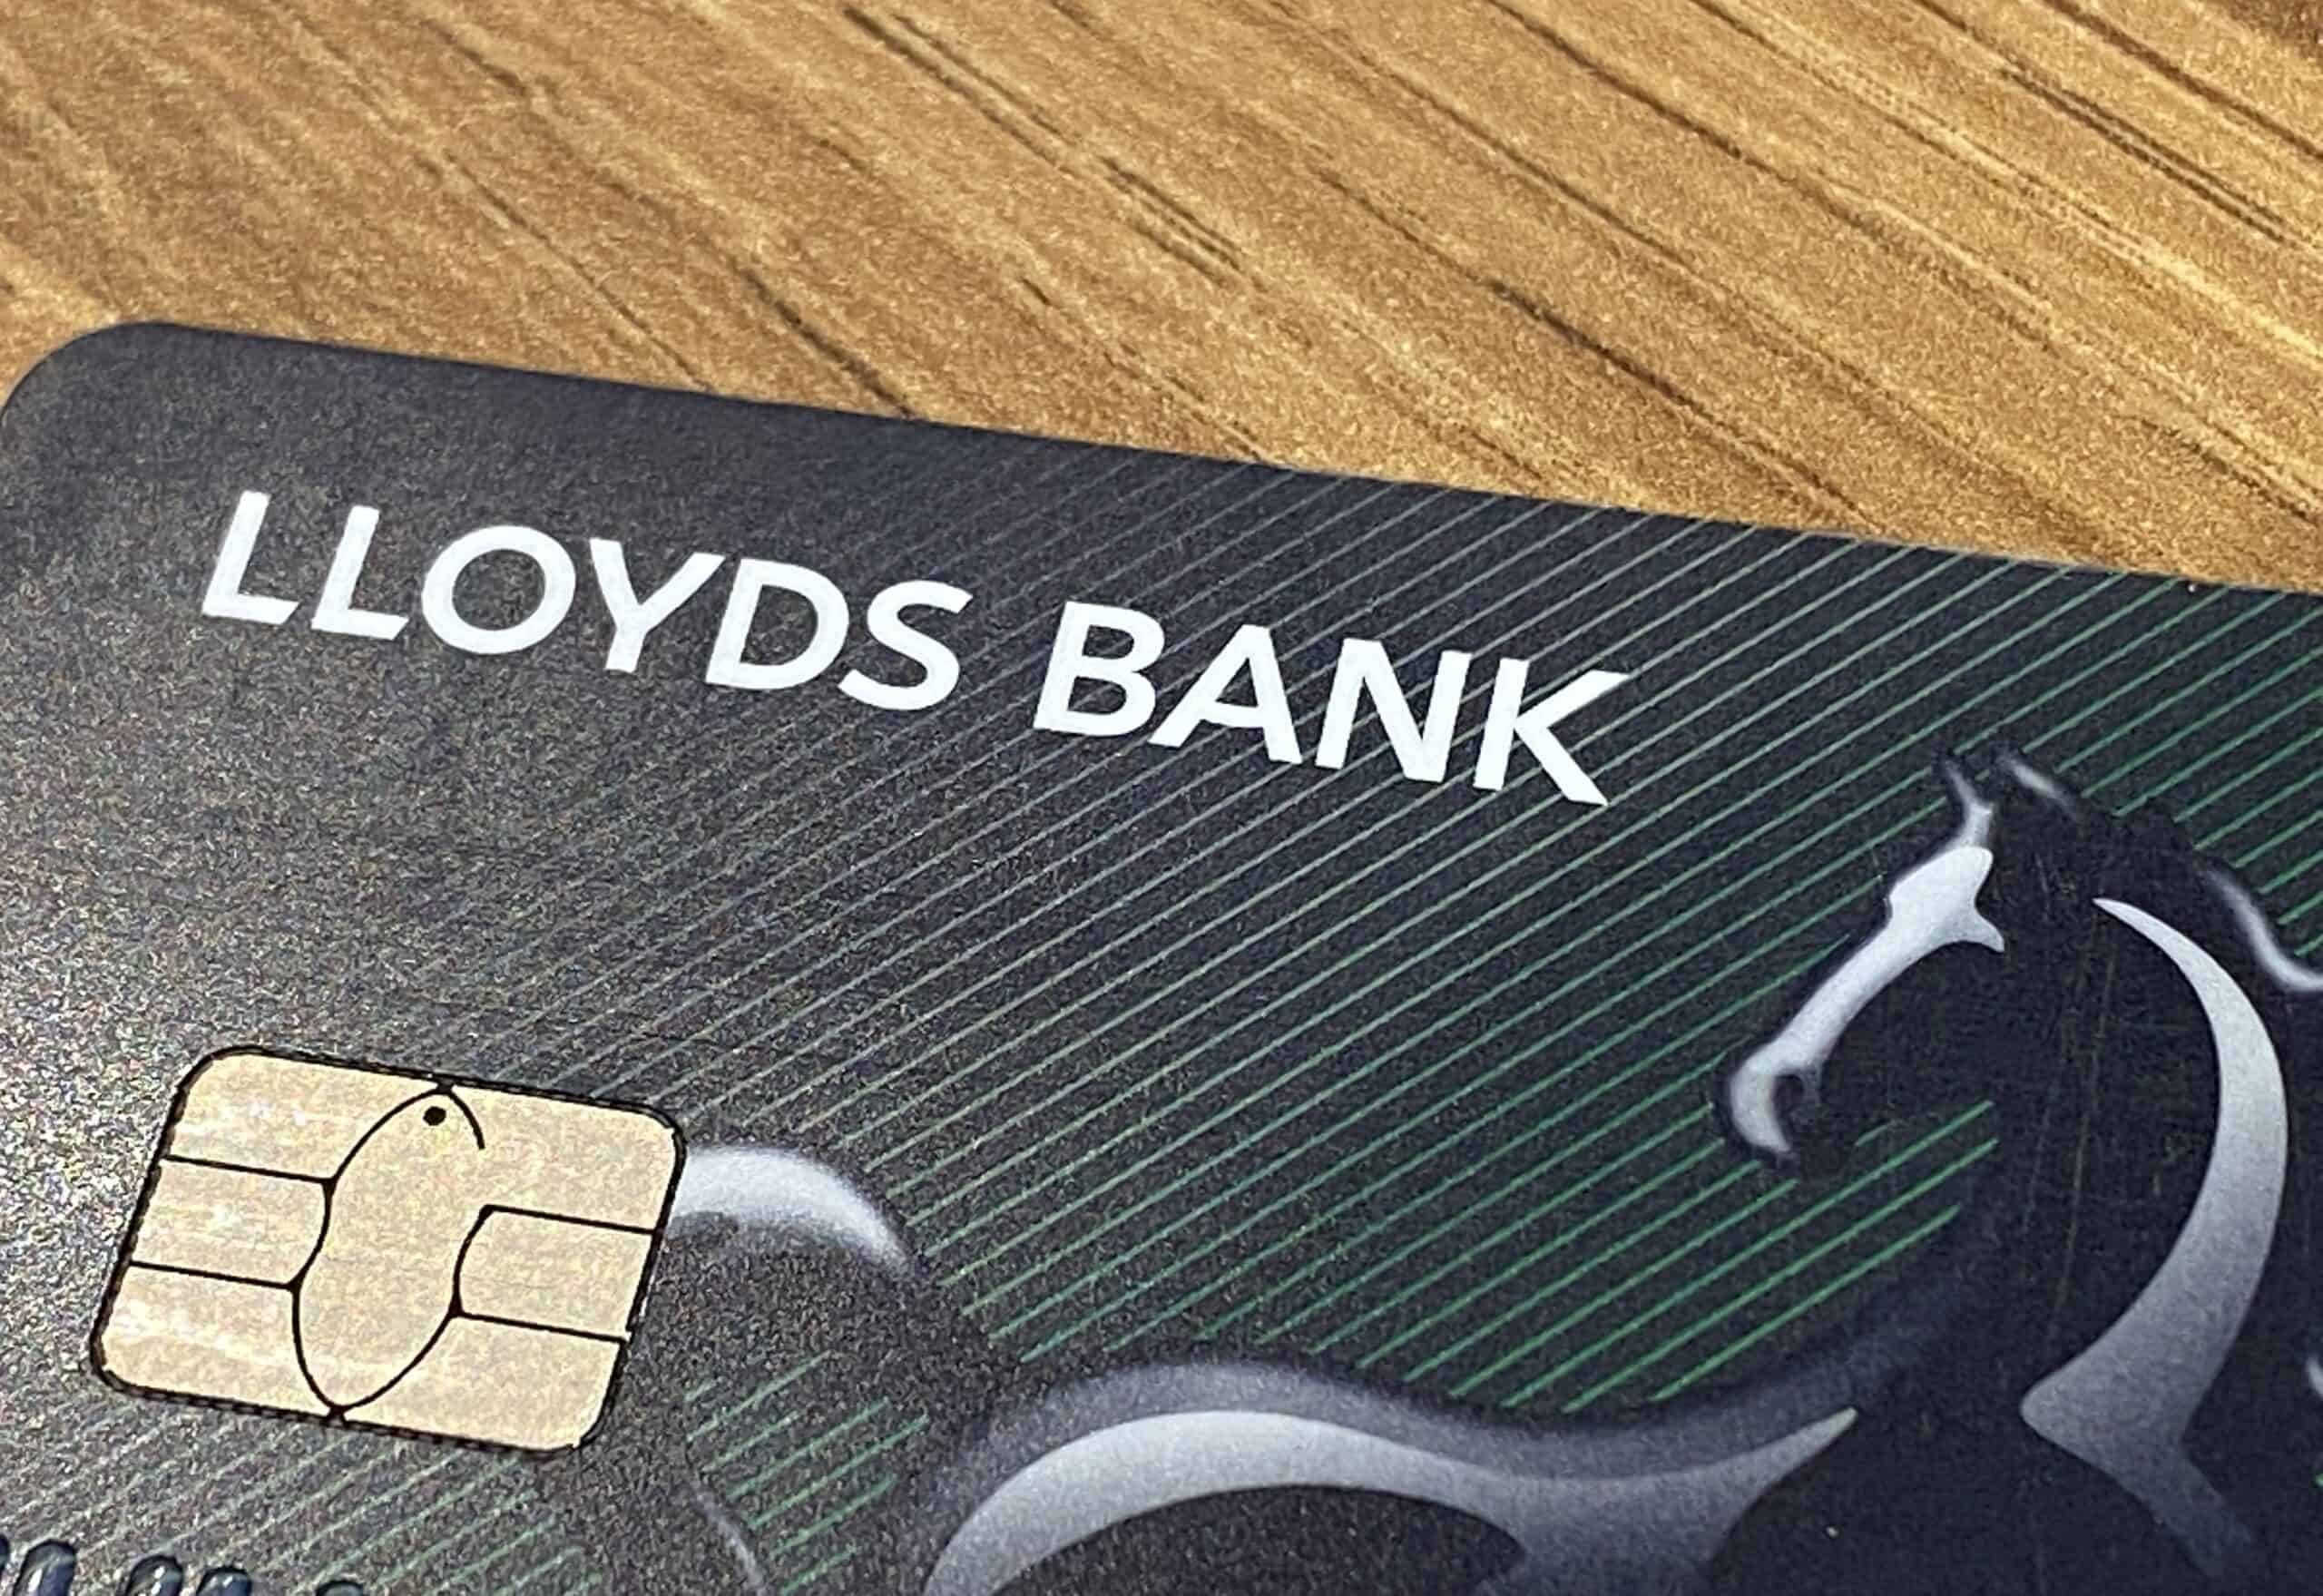 are dogs allowed in lloyds bank